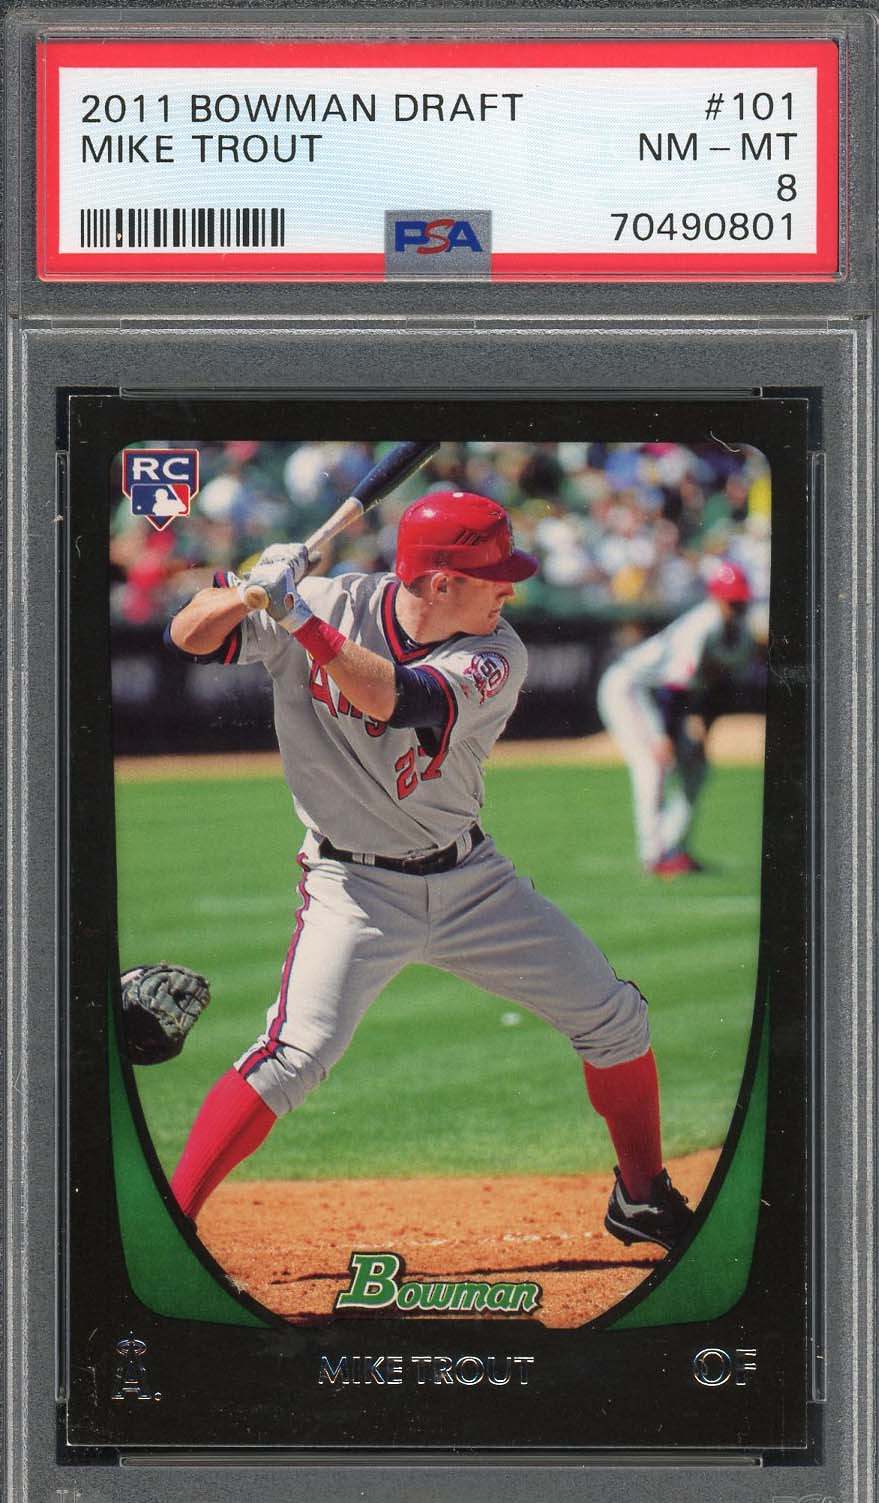 Mike Trout 2011 Bowman Draft Baseball Rookie Card RC #101 Graded PSA 8